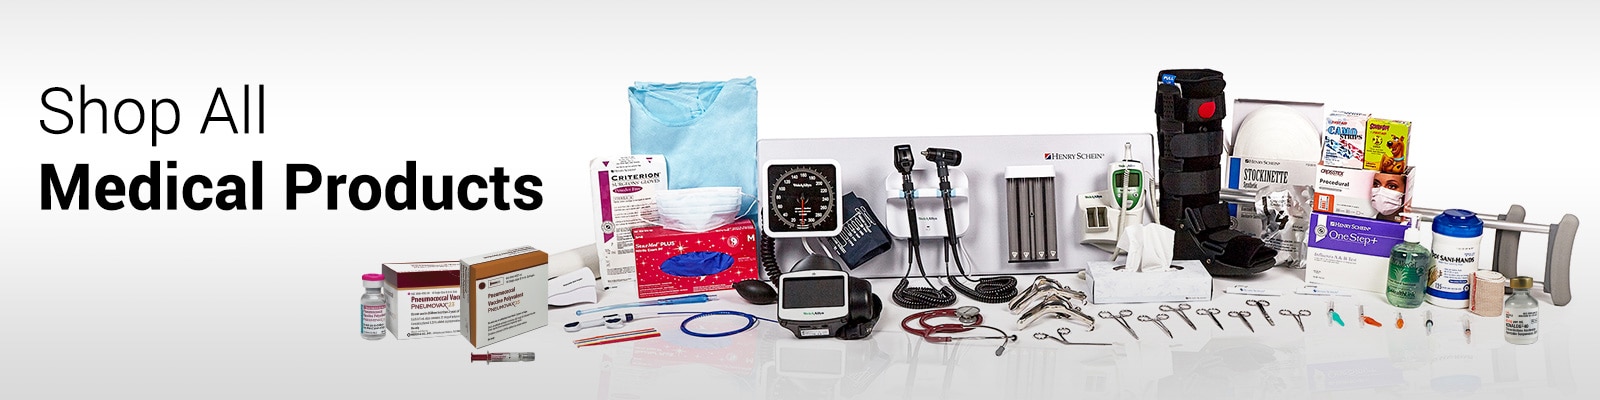 Medical Equipment and Supplies | Medical Supplies Online